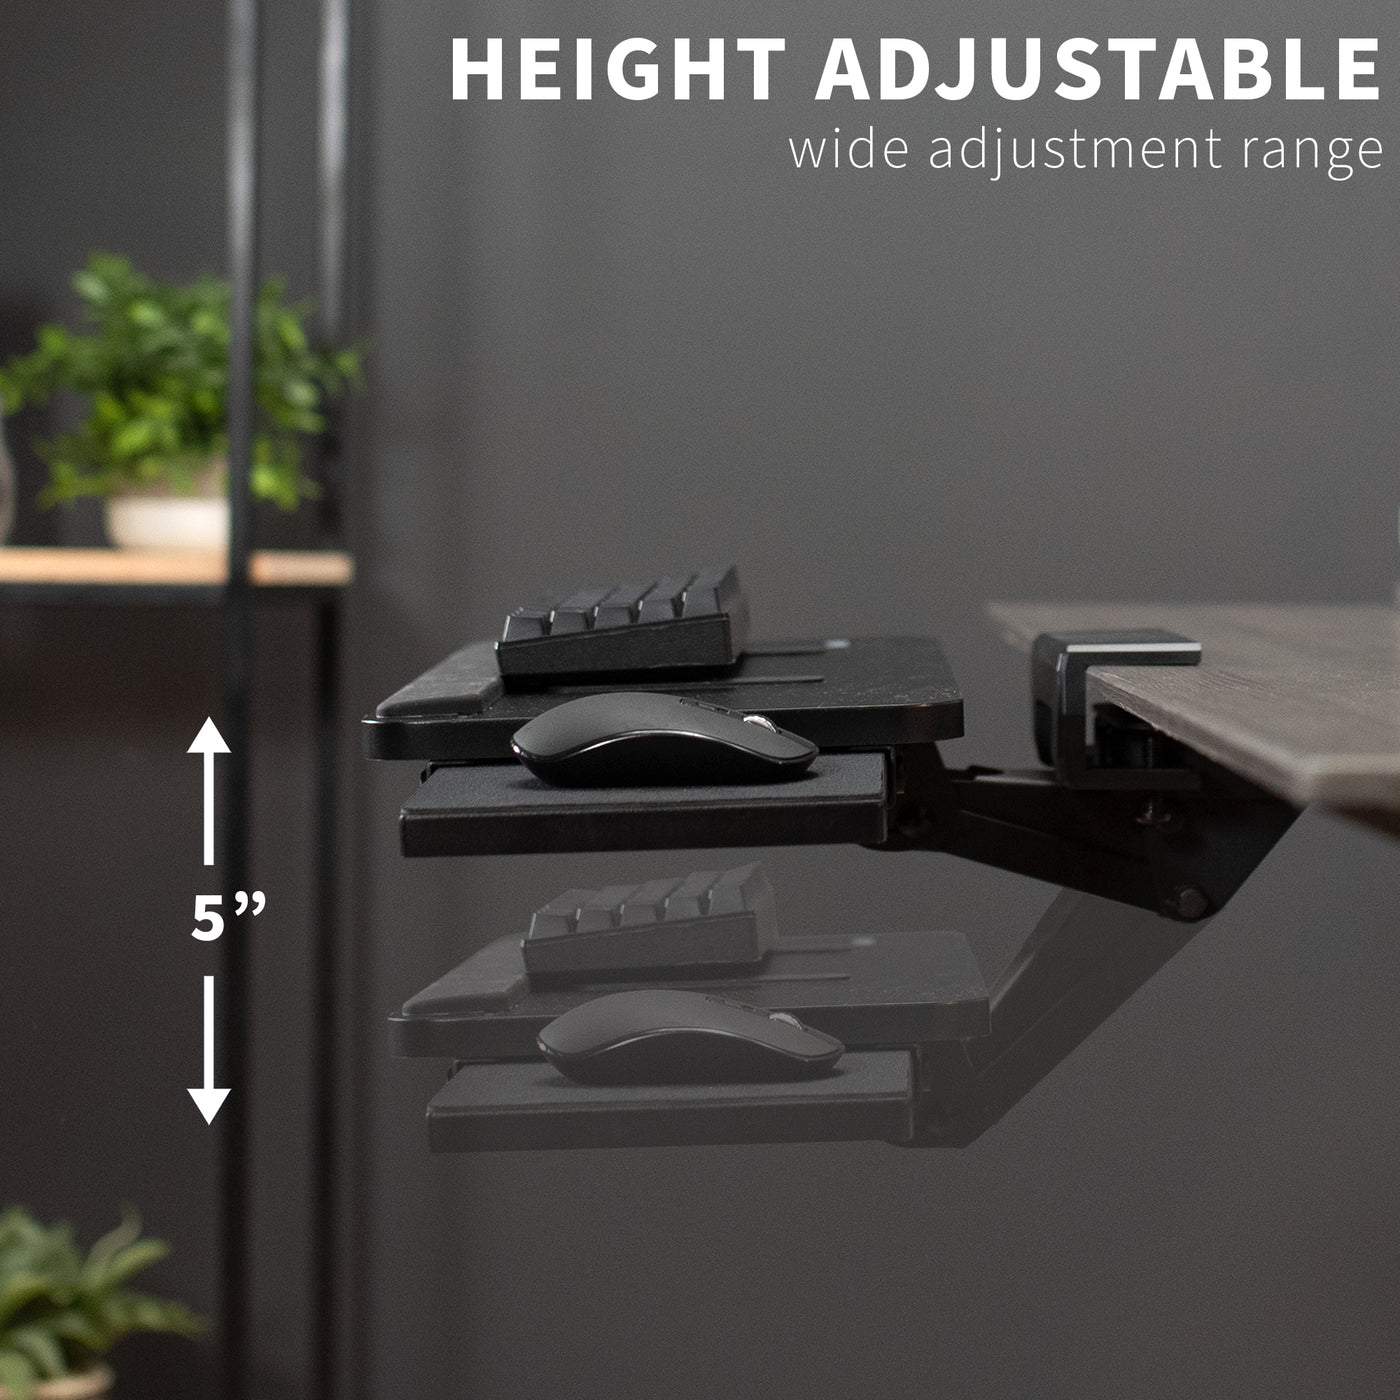 Height adjustable under desk keyboard tray with mousepad.